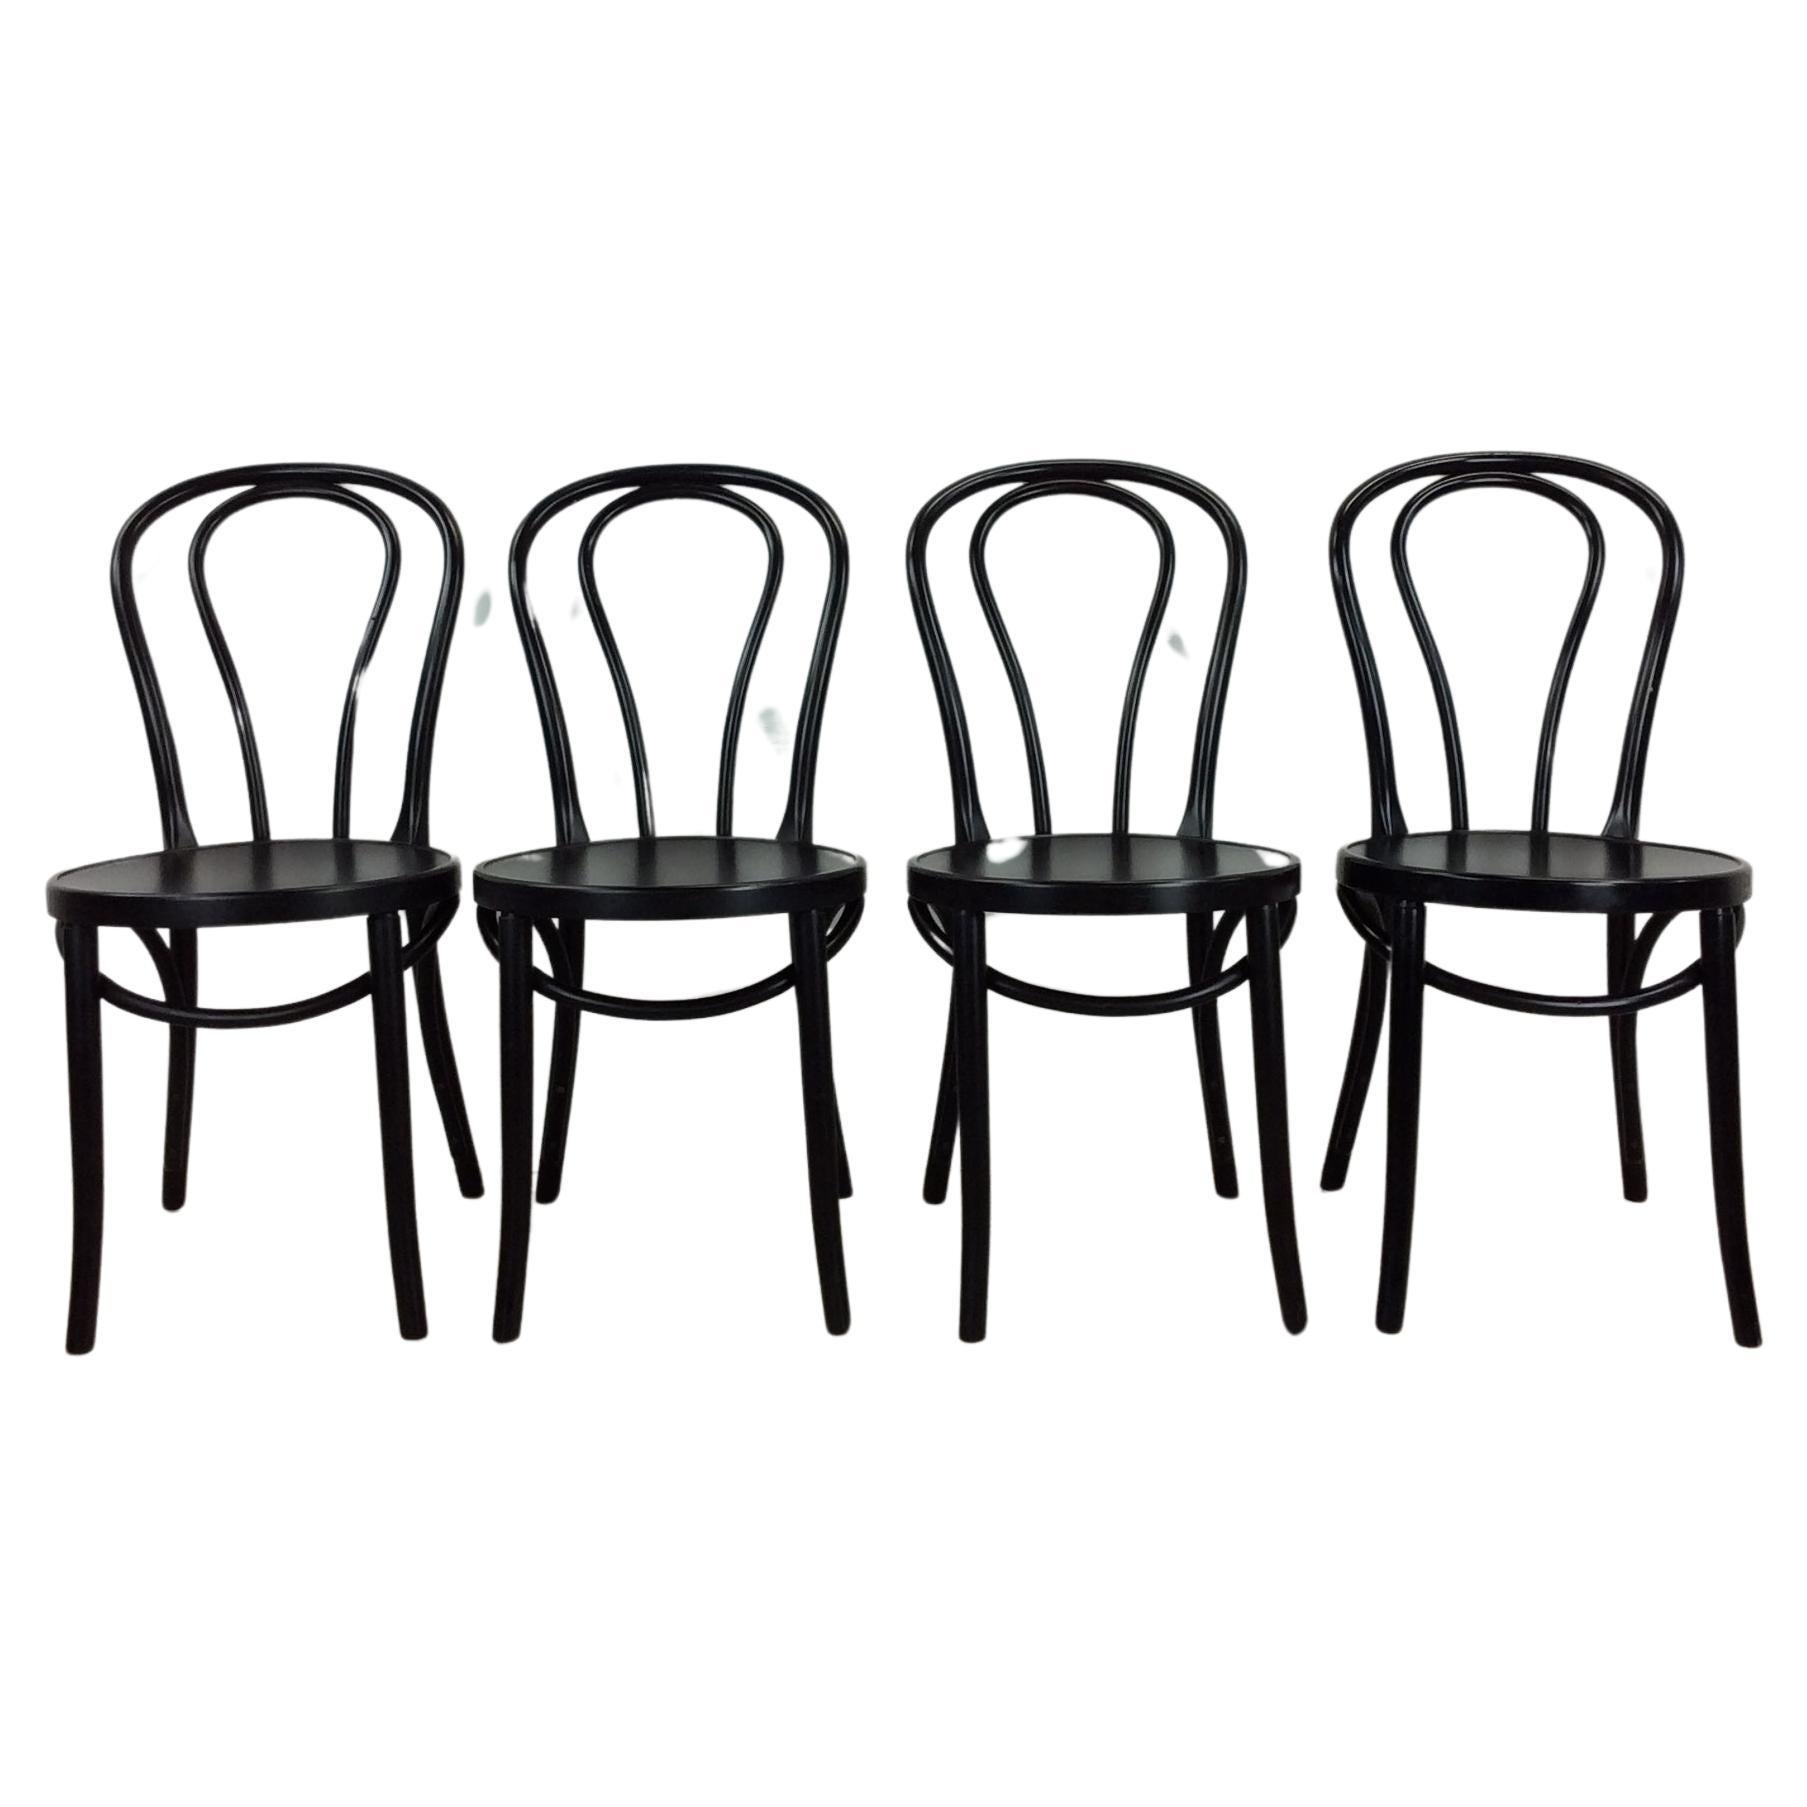 Set of 4 Vintage IKEA Black Cafe Style Chairs